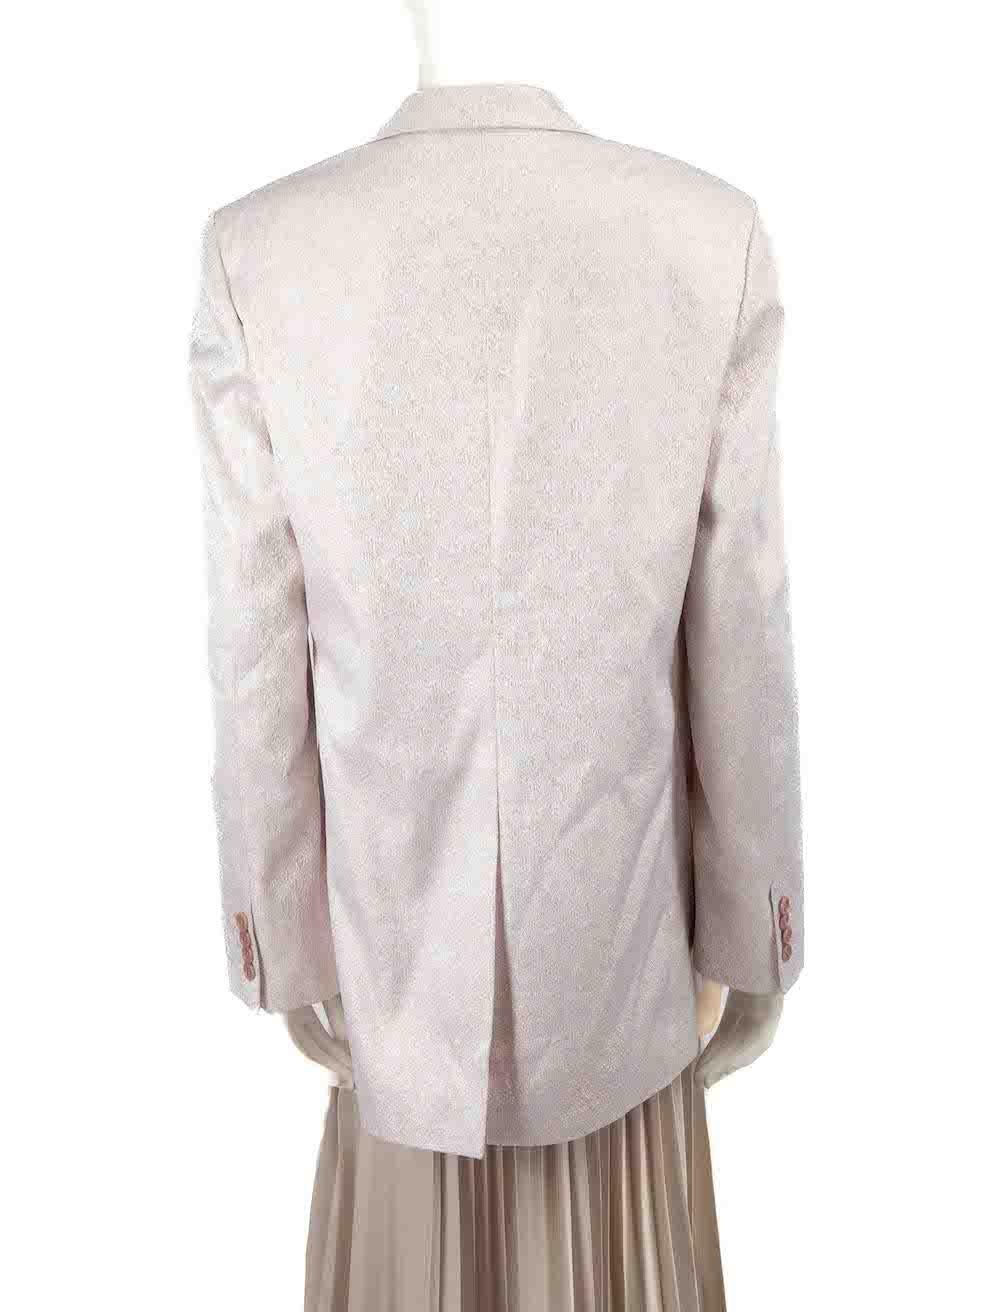 Dries Van Noten Pink Metallic Single Breasted Blazer Size L In New Condition For Sale In London, GB